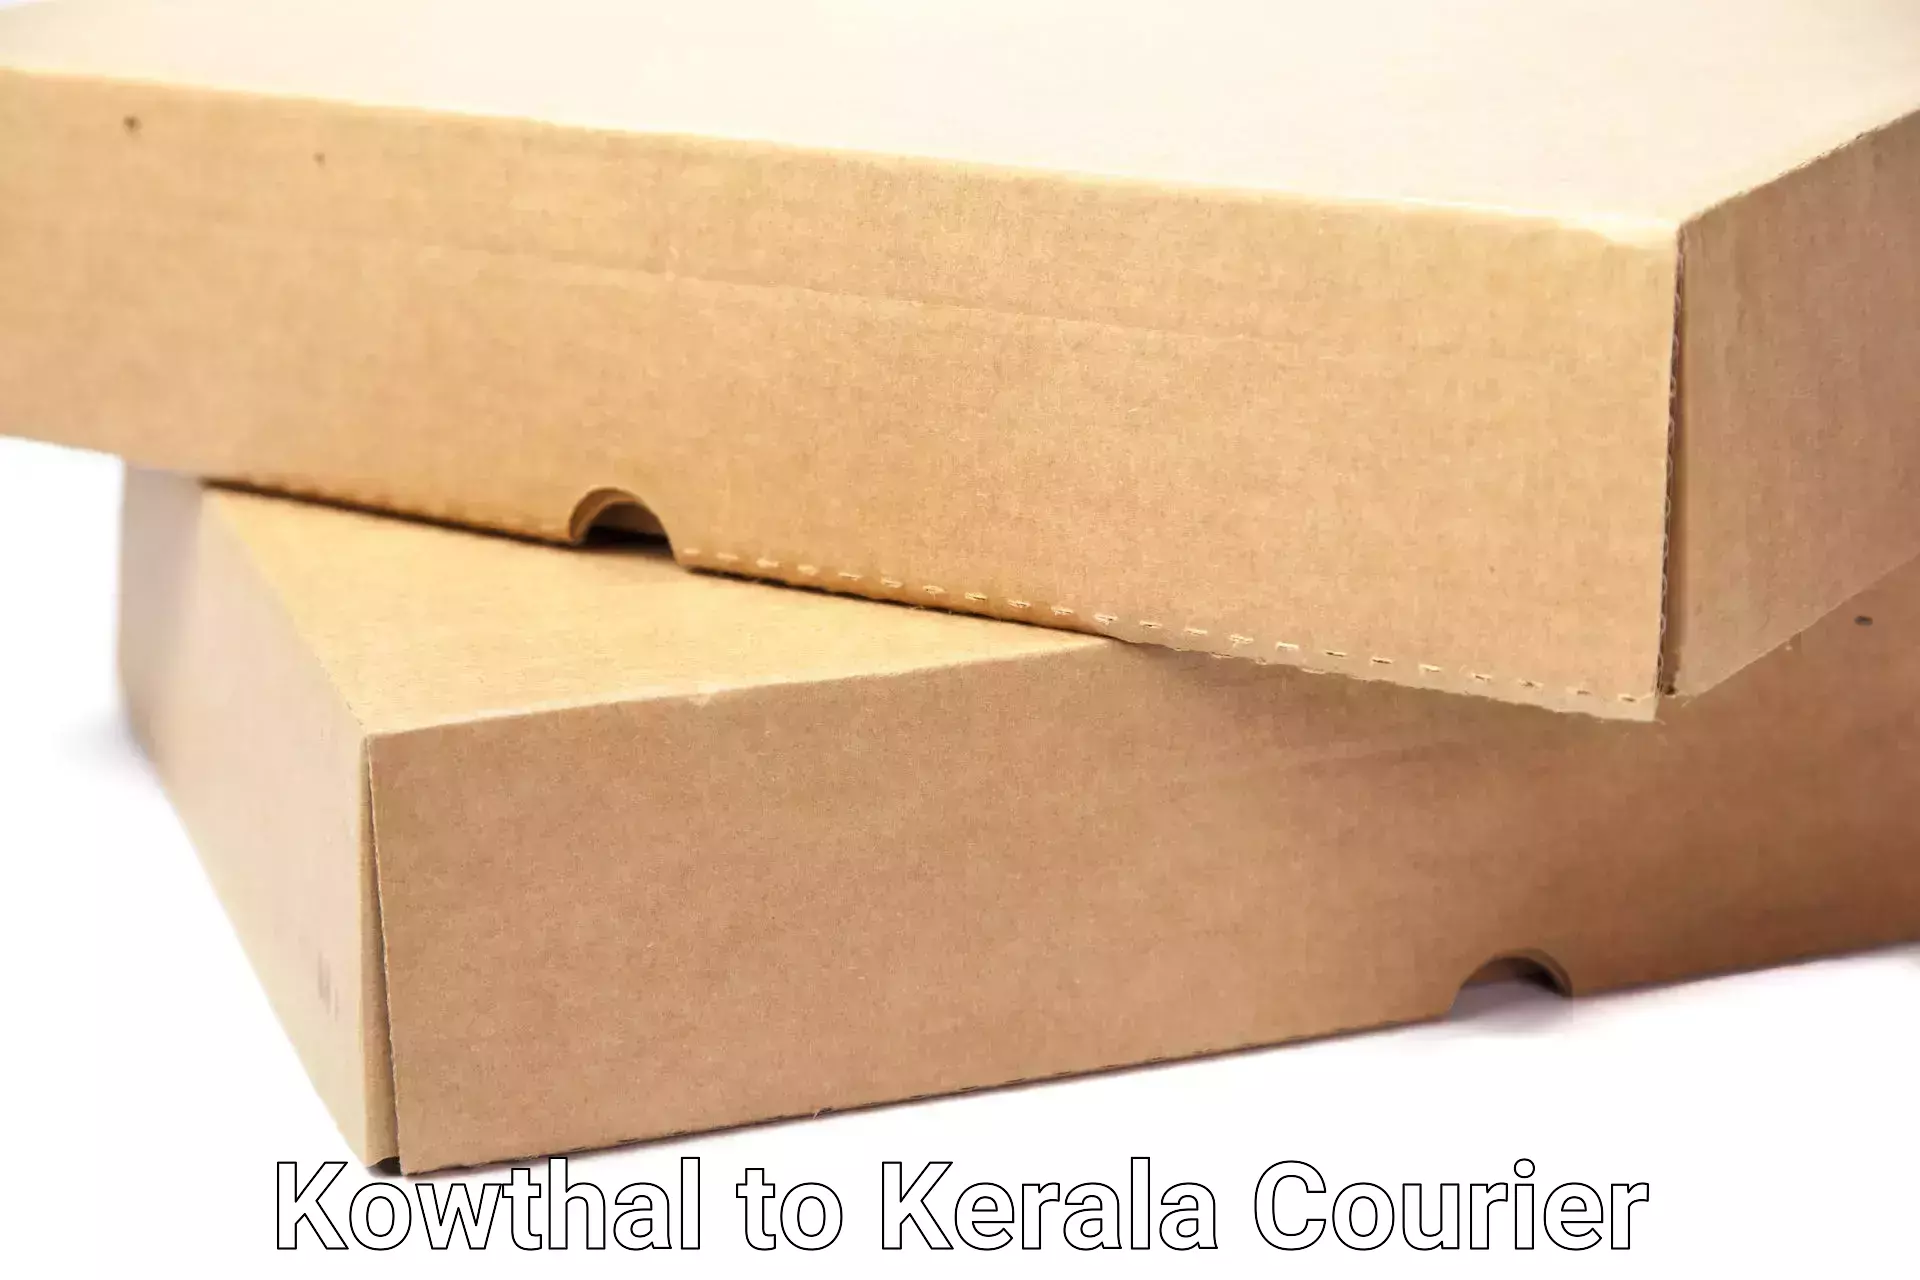 Trusted moving company Kowthal to Kottayam